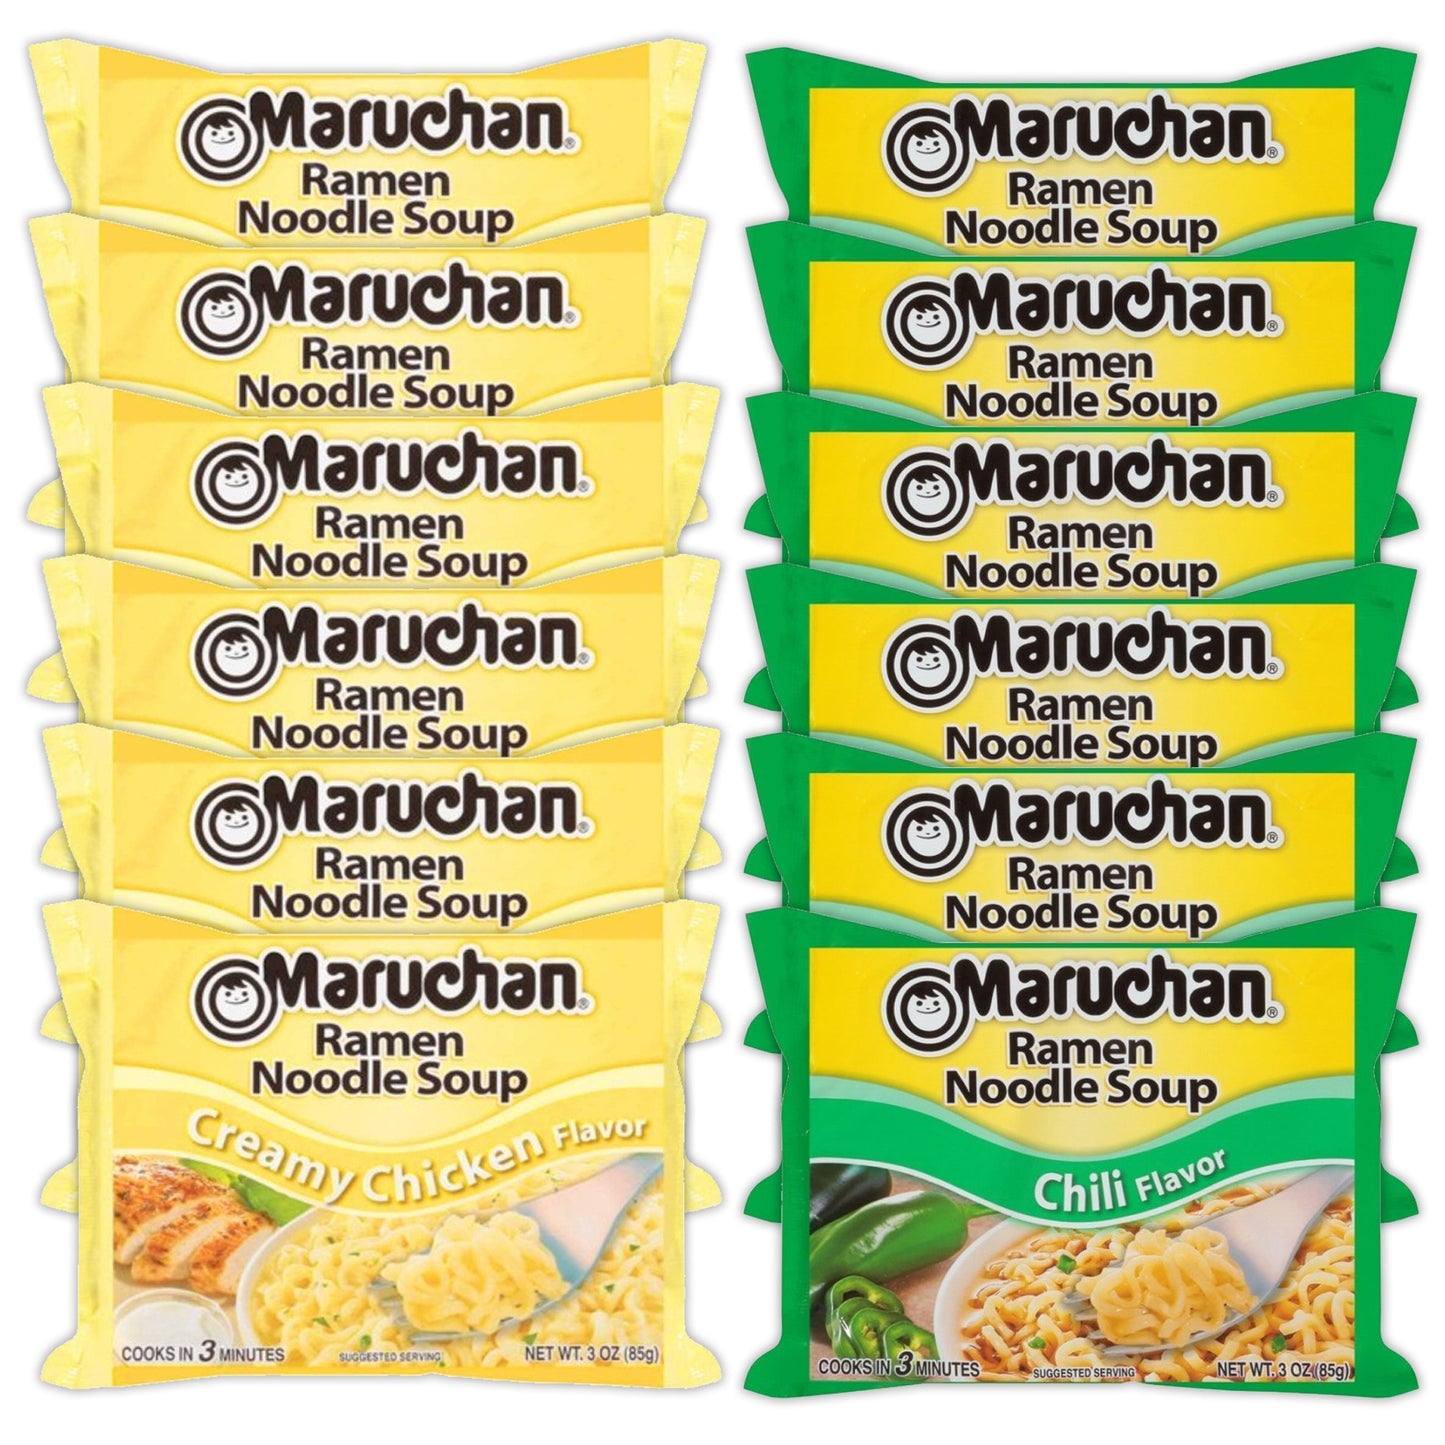 Maruchan Ramen Instant Noodle Soup Variety, 2 Flavors - 6 Packs Creamy Chicken & 6 Packs Chili , 3 Ounce Single Servings Lunch / Dinner Variety